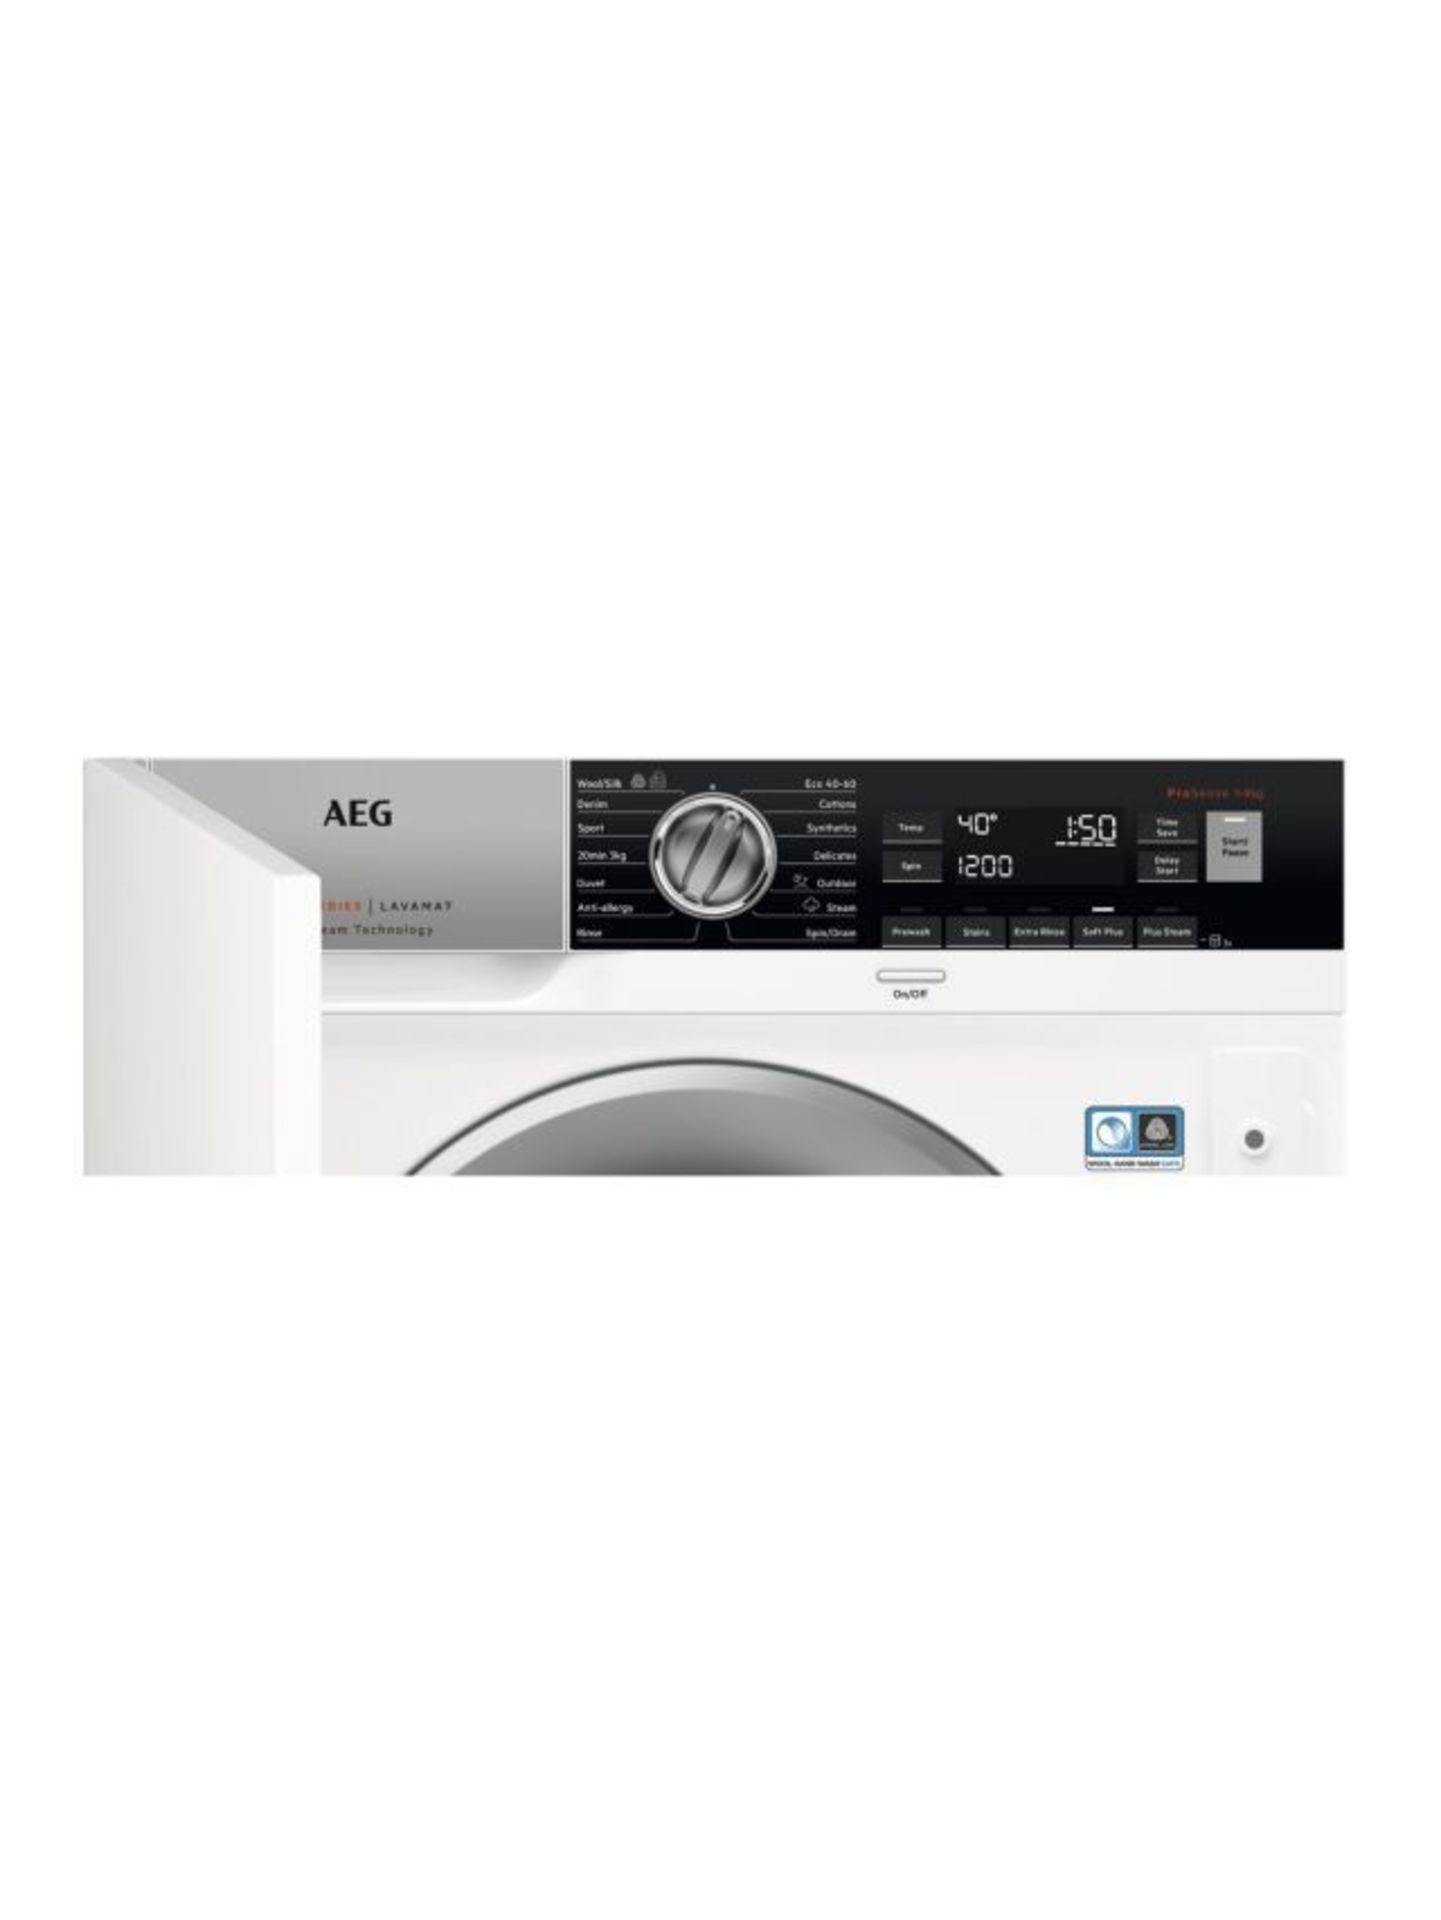 AEG 7000 L7FC8432BI Integrated Washing Machine, 8kg Load, 1400rpm Spin, White. - H/S. RRP £999.00. - Image 2 of 6